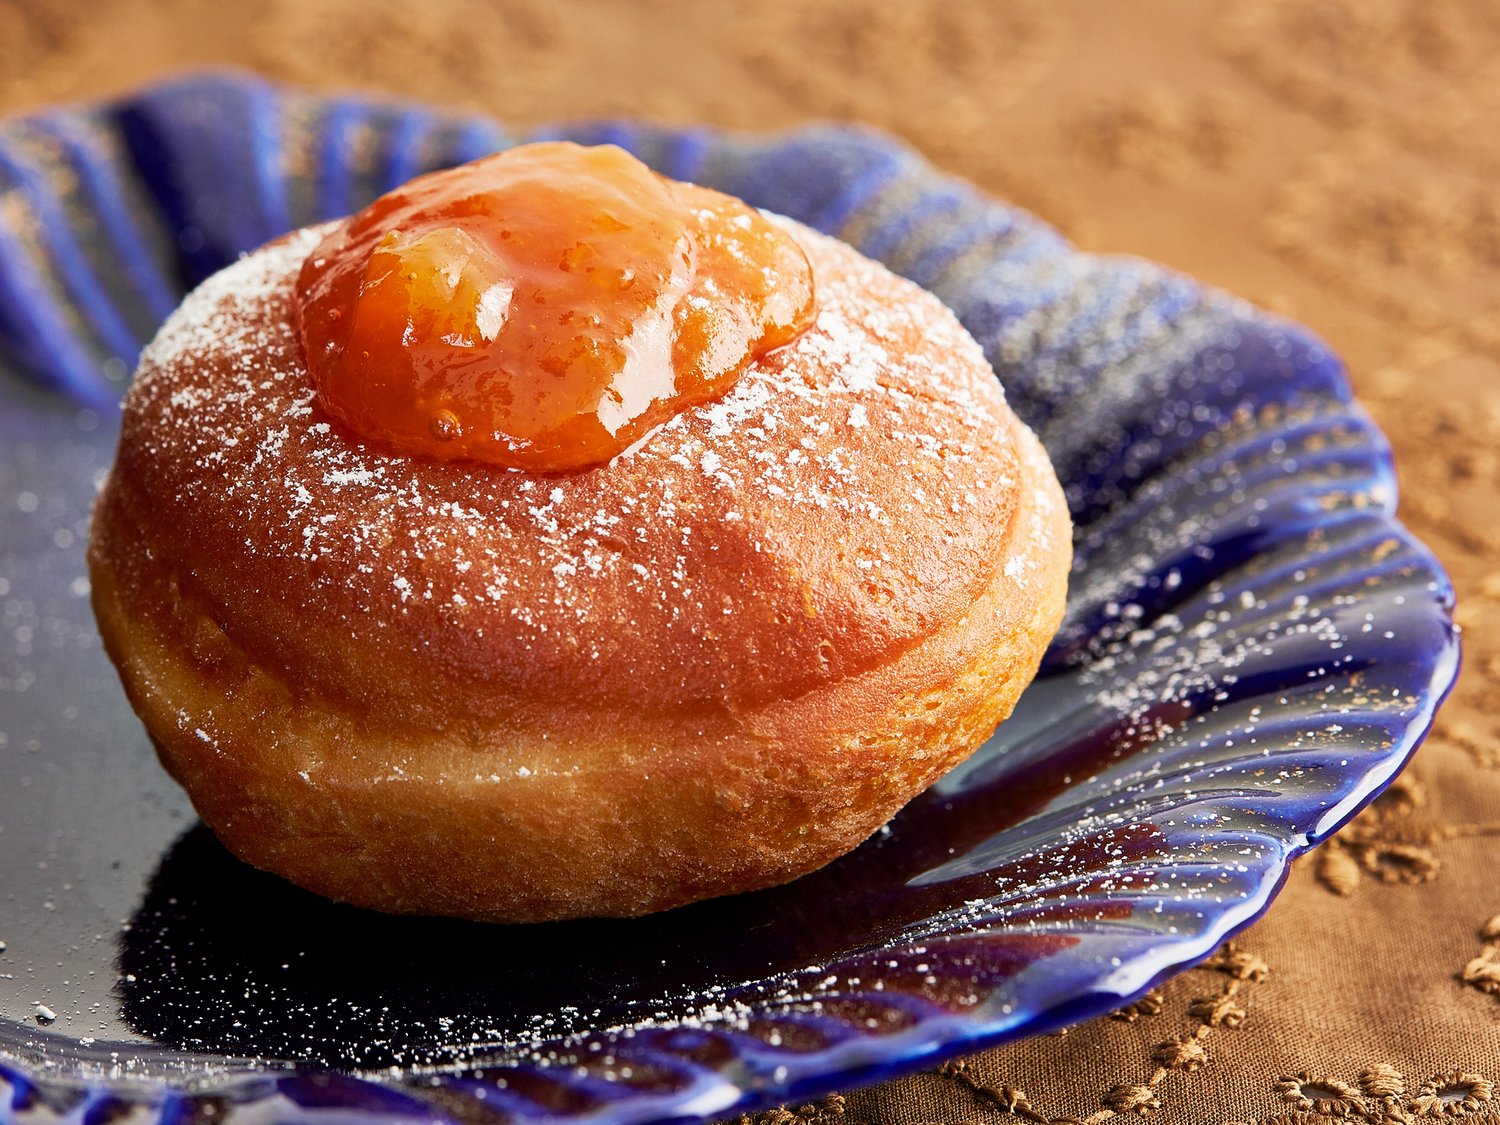 Dome-shaped doughnut topped with apricot jam sits atop blue plate on brown tablecloth